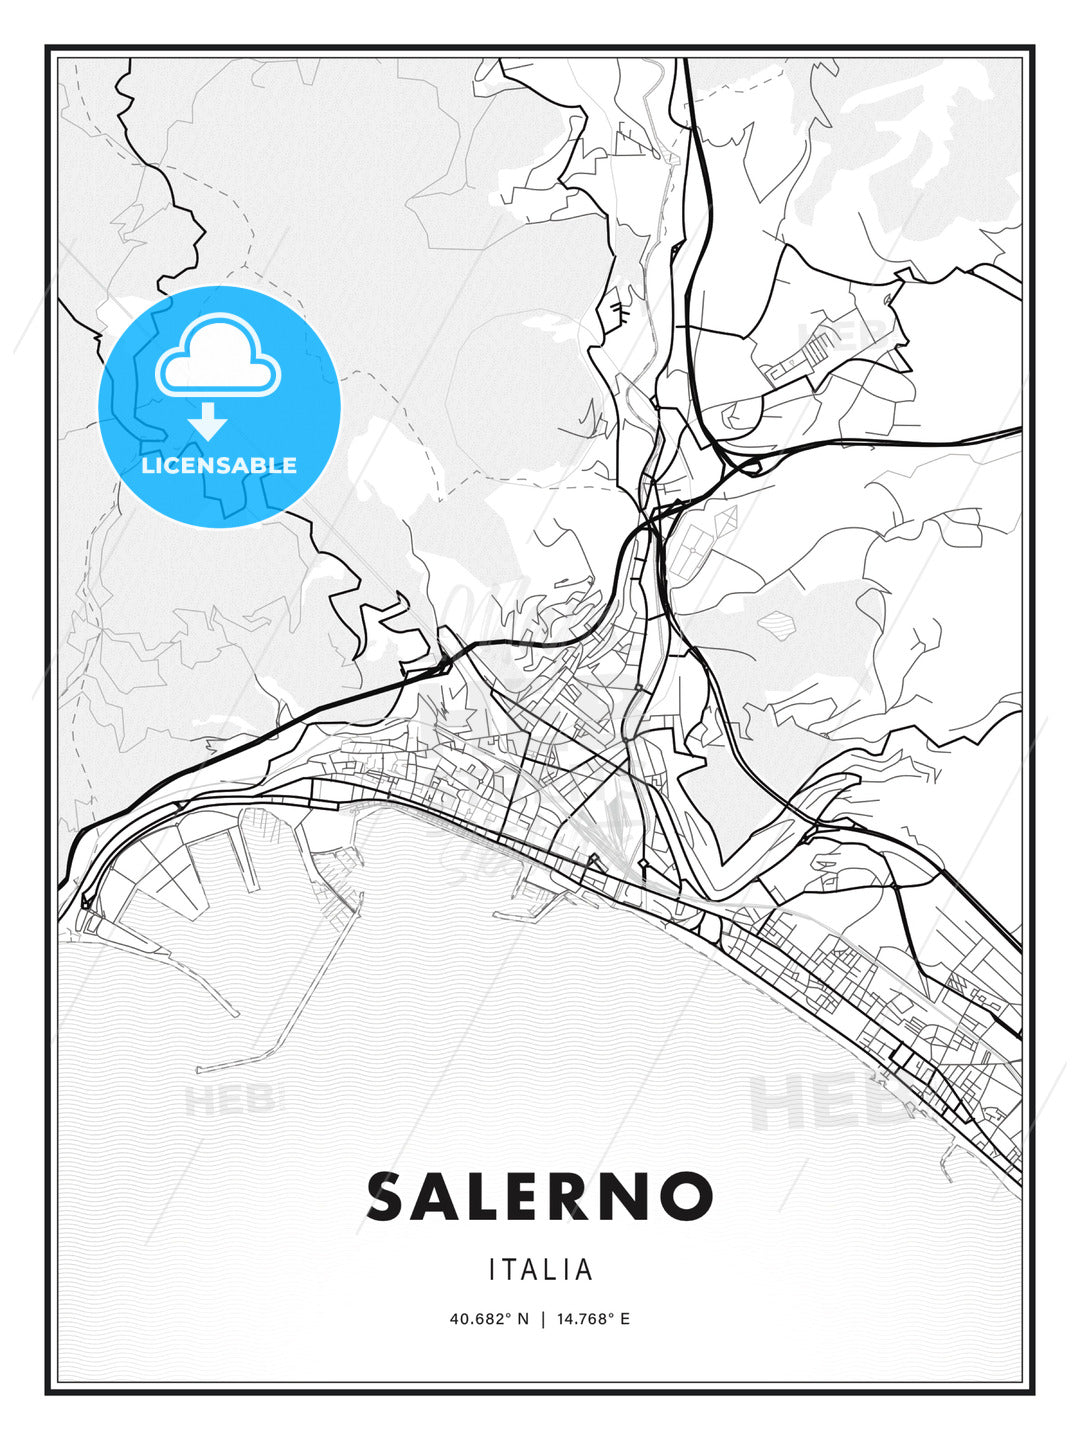 Salerno, Italy, Modern Print Template in Various Formats - HEBSTREITS Sketches